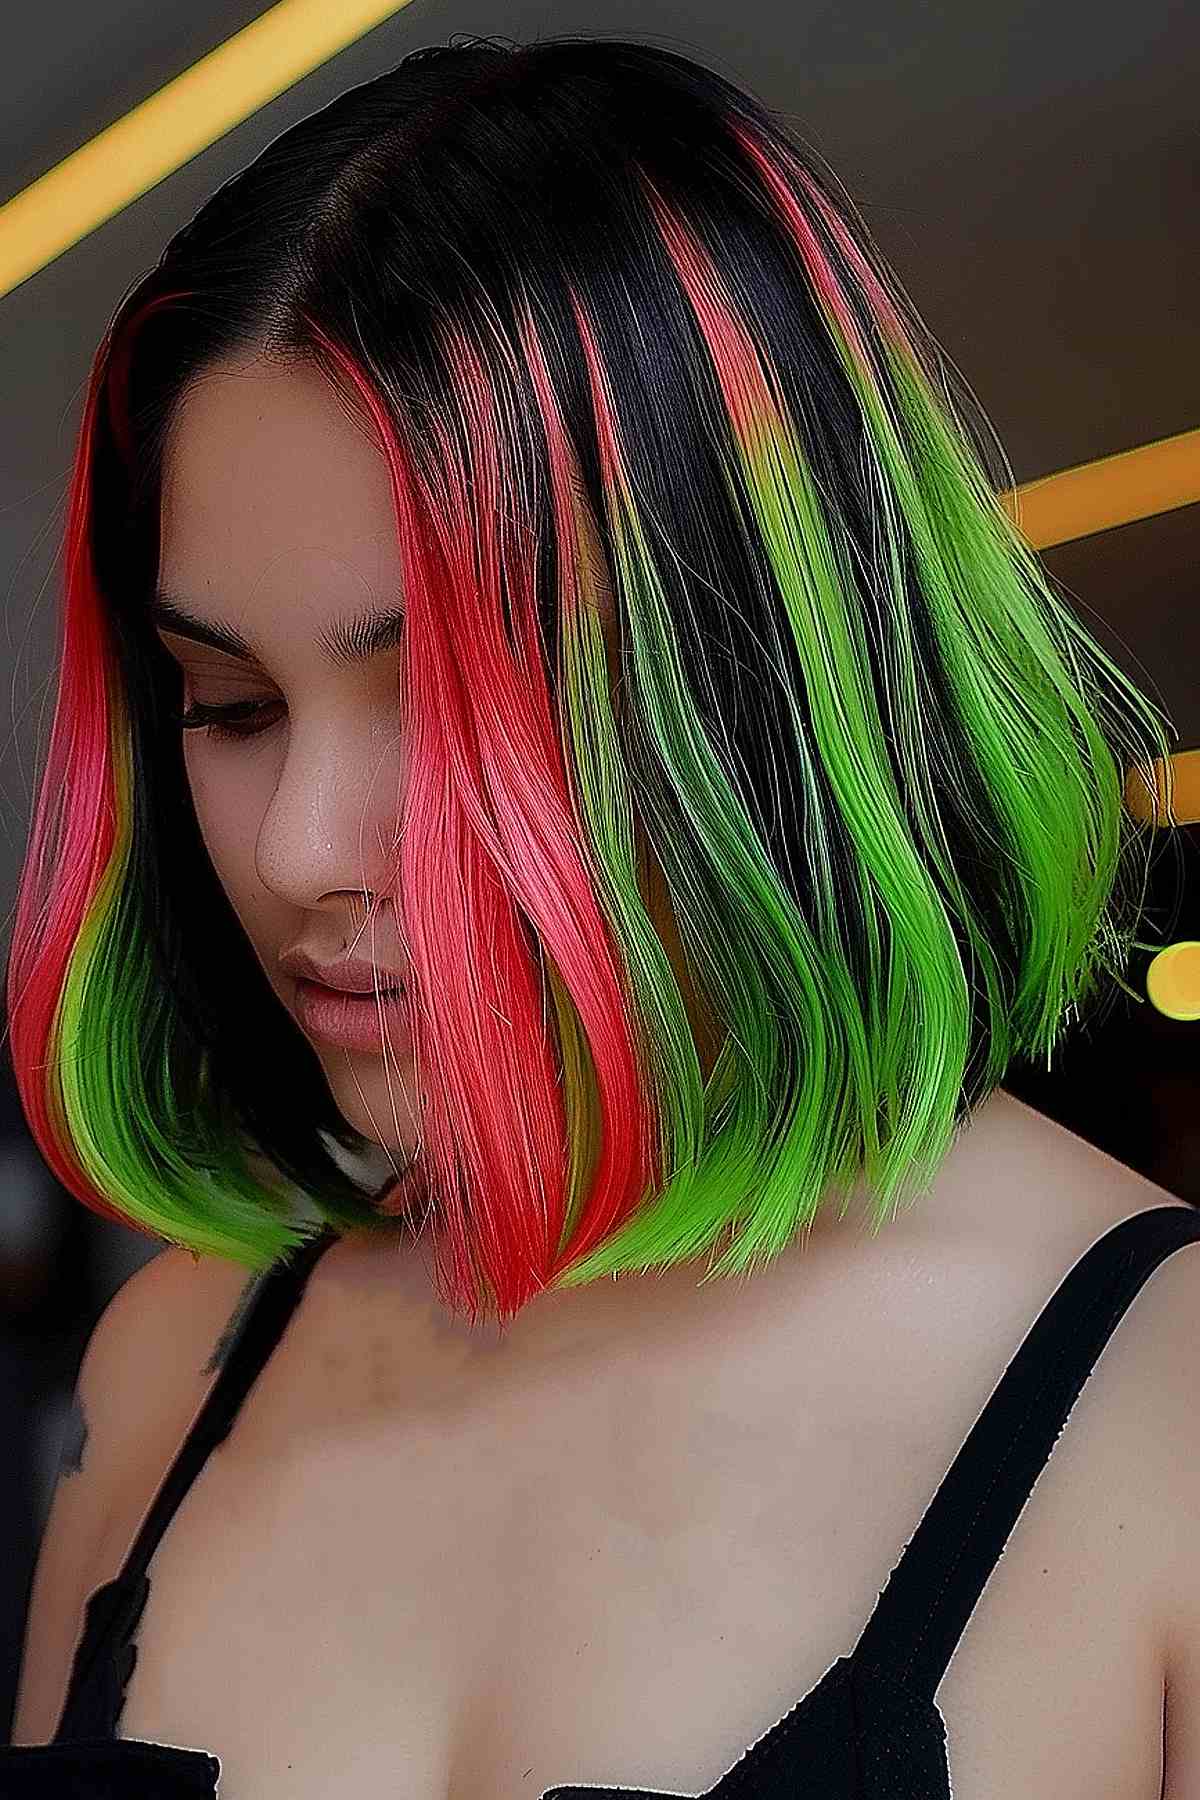 Short bob hairstyle featuring neon watermelon highlights with sharp contrast between neon green, vivid pink, and a deep black base, styled to showcase the dynamic color play. 